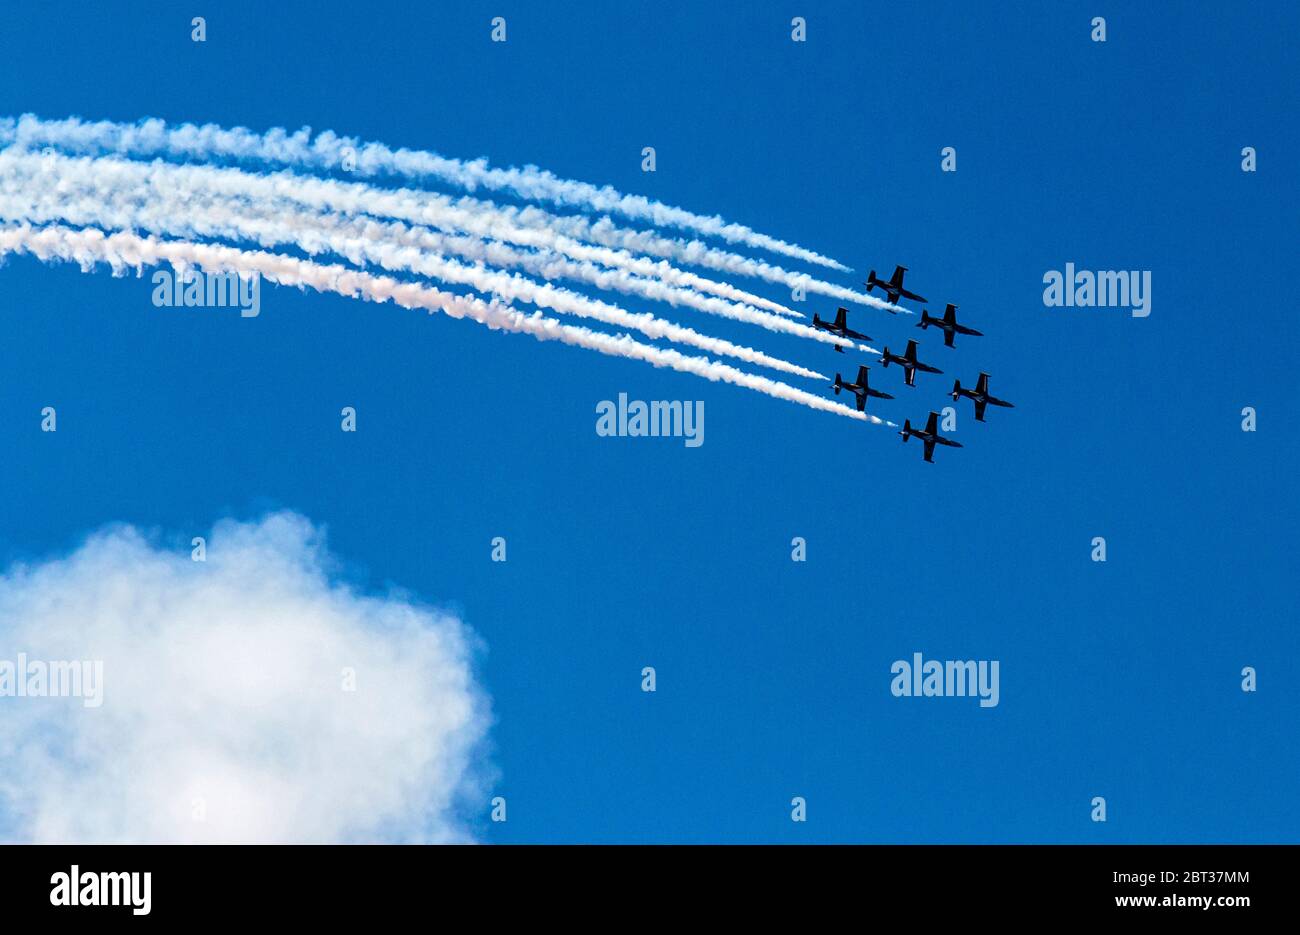 The Breitling Jet Team performing at Seattle’s 2015 Seafair Air Show. The team is the largest civilian aerobatic display team in Europe. Based in Dijon, France, it flies seven Czech Aero L-39 Albatros jets. The team flies a display lasting 18–20 minutes that includes formation flying, opposition passes, solo routines, and synchronized maneuvers. They flew in the US for the first time in 2015. These planes represent an excellent compromise between performance, aesthetics, reliability and operating costs. They were widely used in all former Soviet bloc countries. Stock Photo